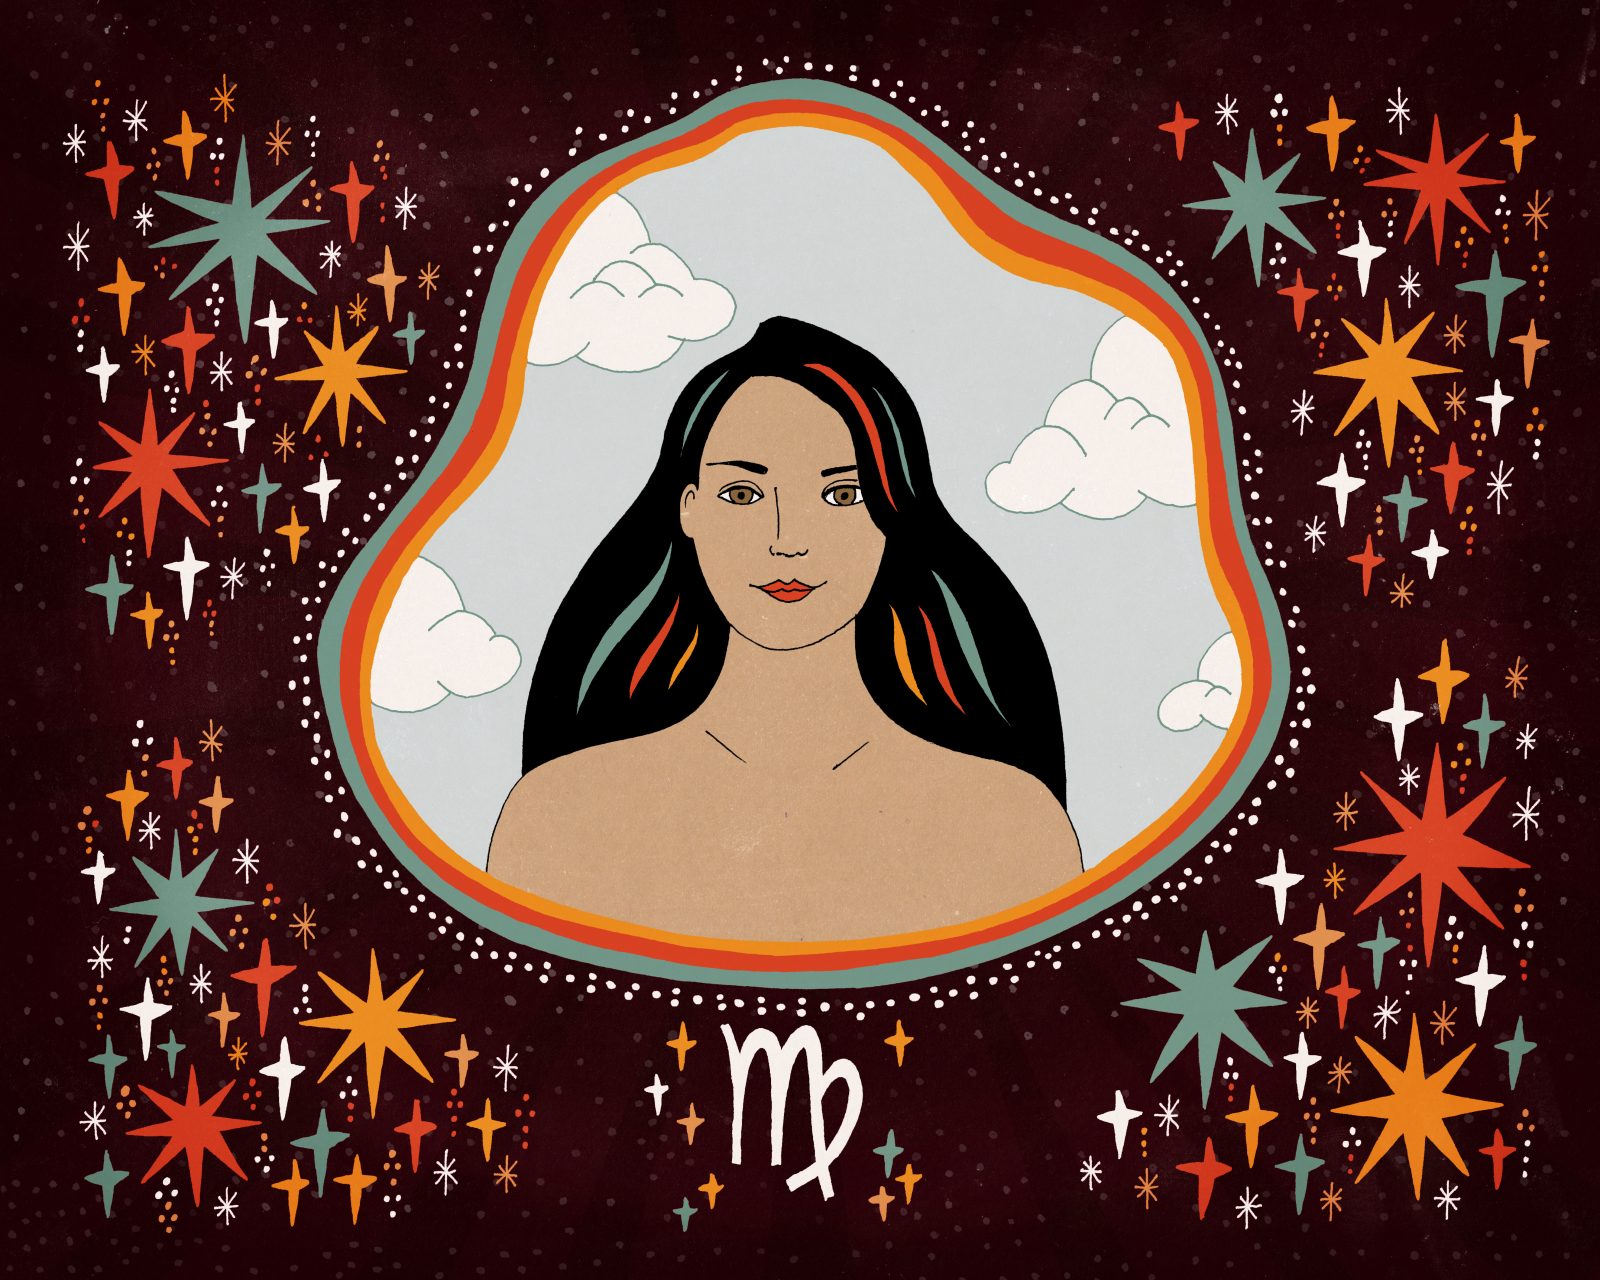 Your Monthly Horoscope: May 2020 - Society6 Blog